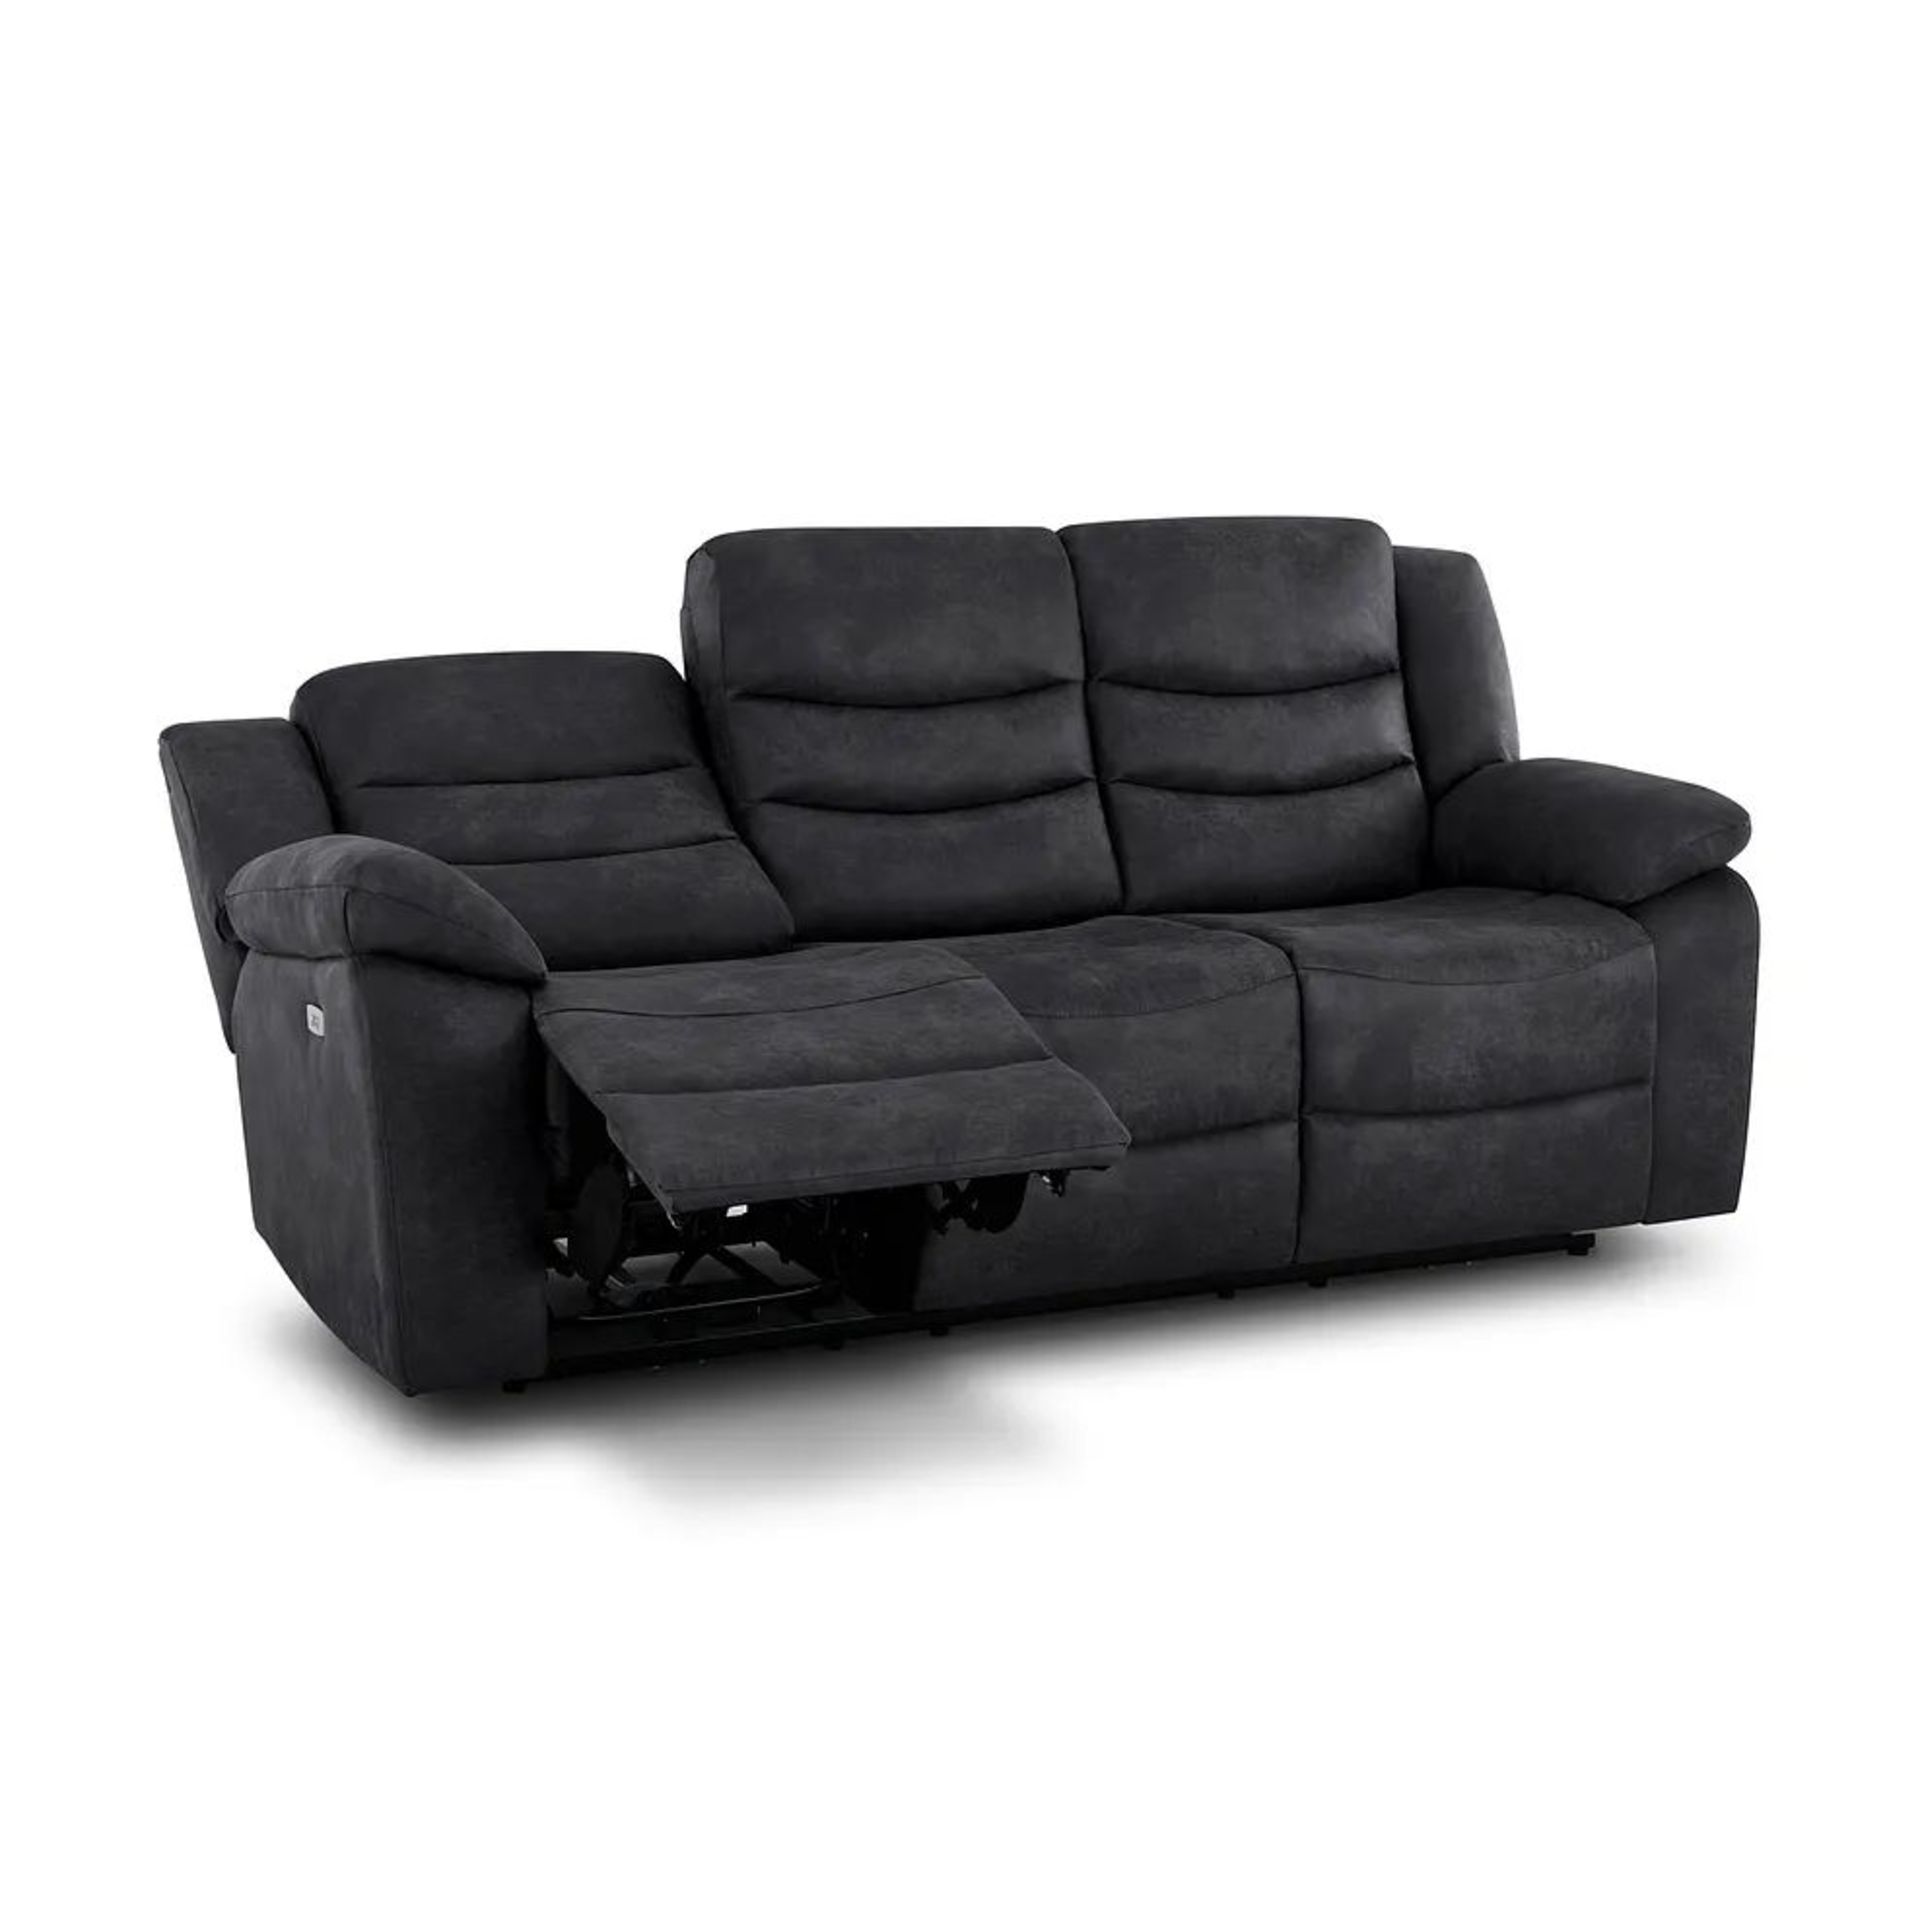 BRAND NEW MARLOW 3 Seater Electric Recliner Sofa - MILLER GREY FABRIC. RRP £1199. Designed to suit - Image 4 of 12